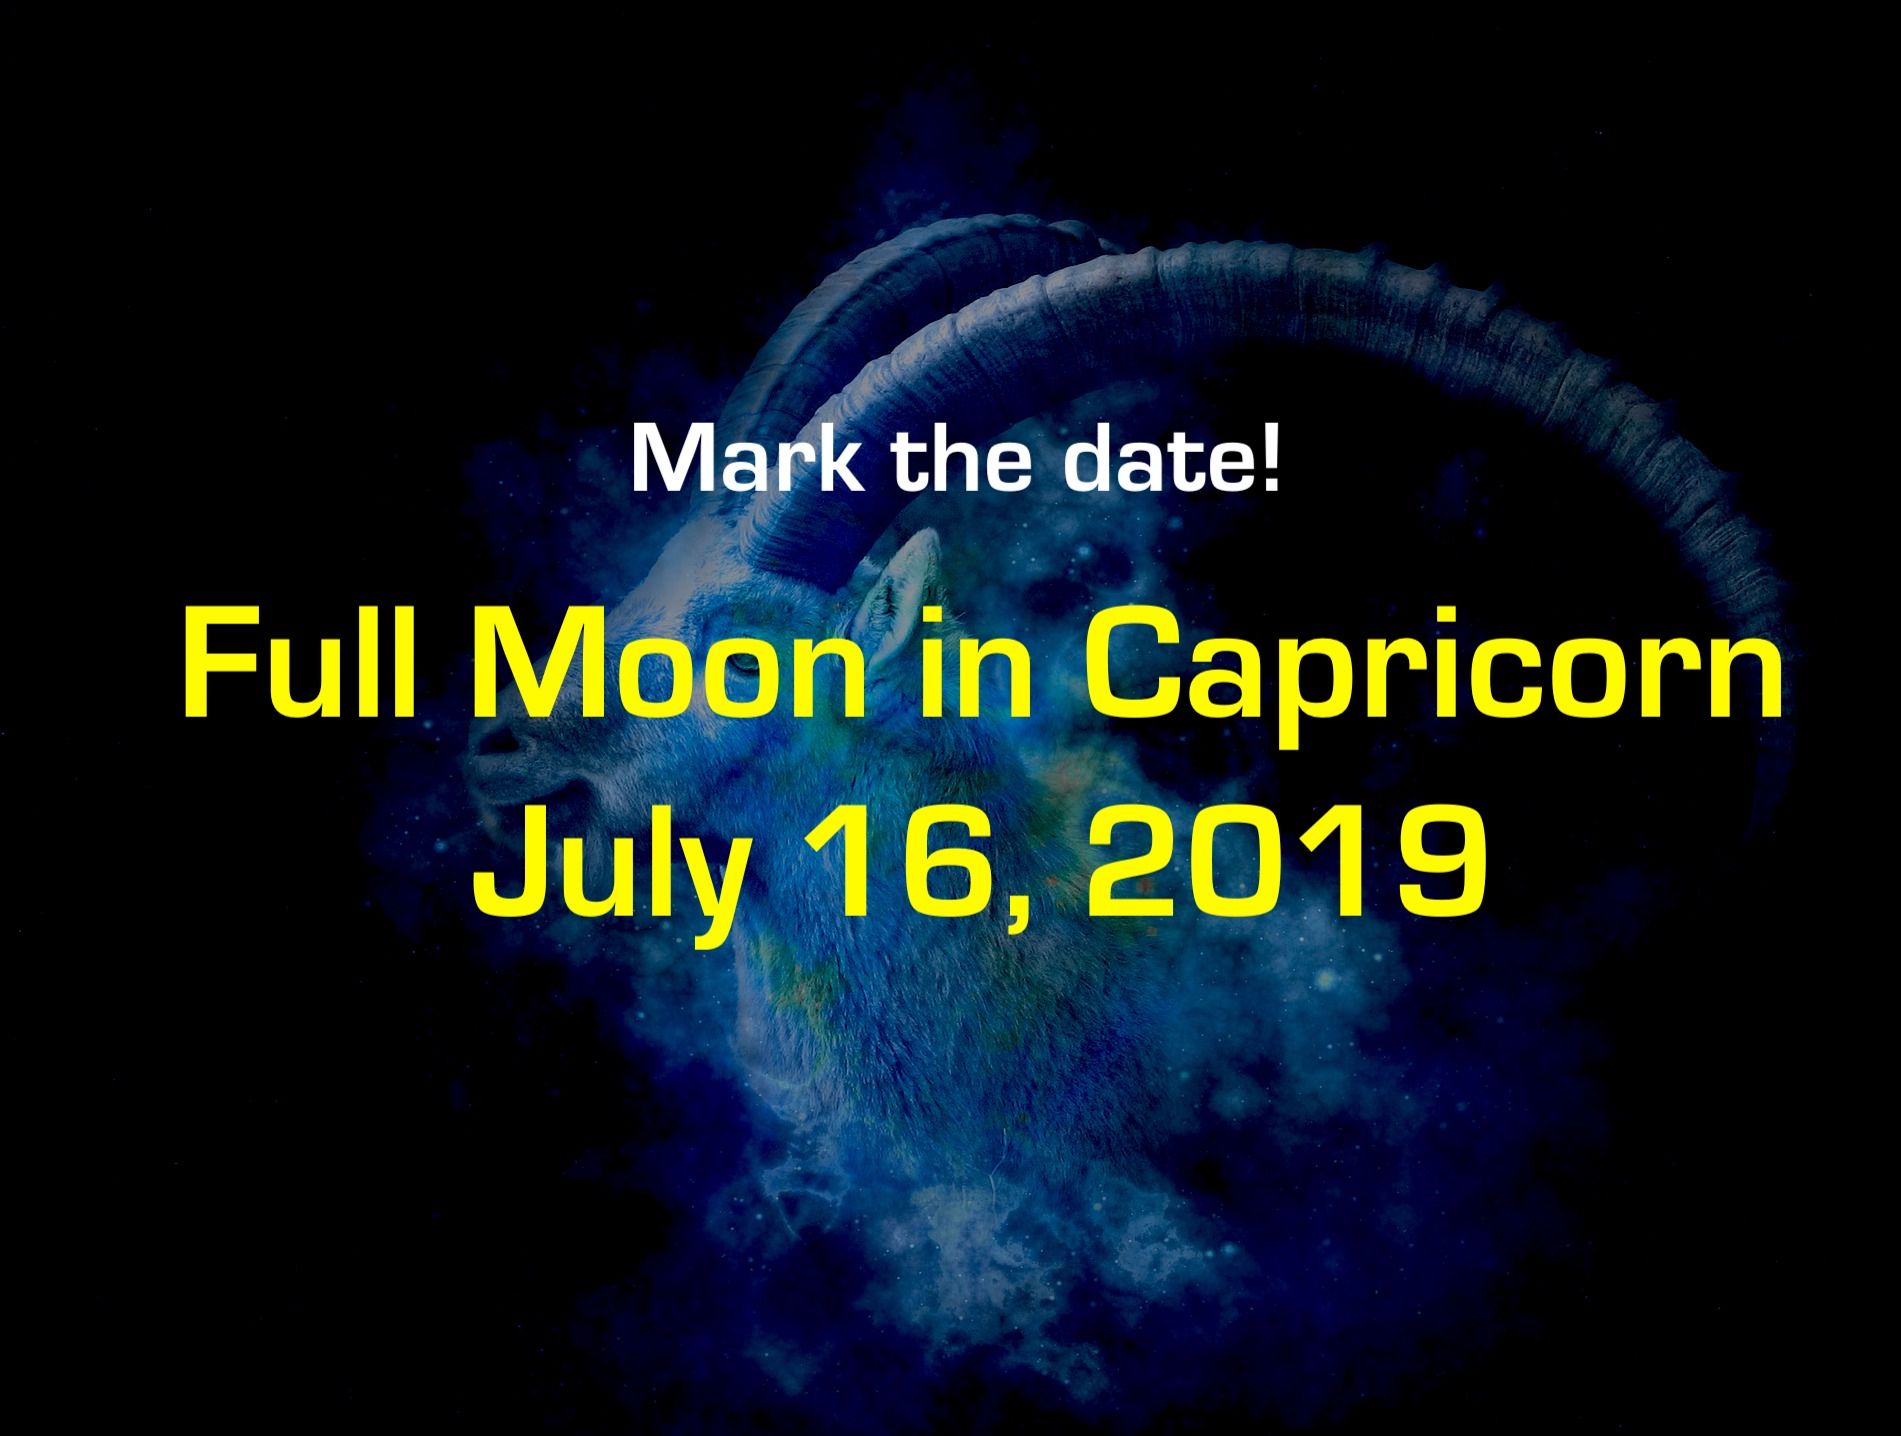 Full Moon In Capricorn July 16, 2019: Are You Ready?